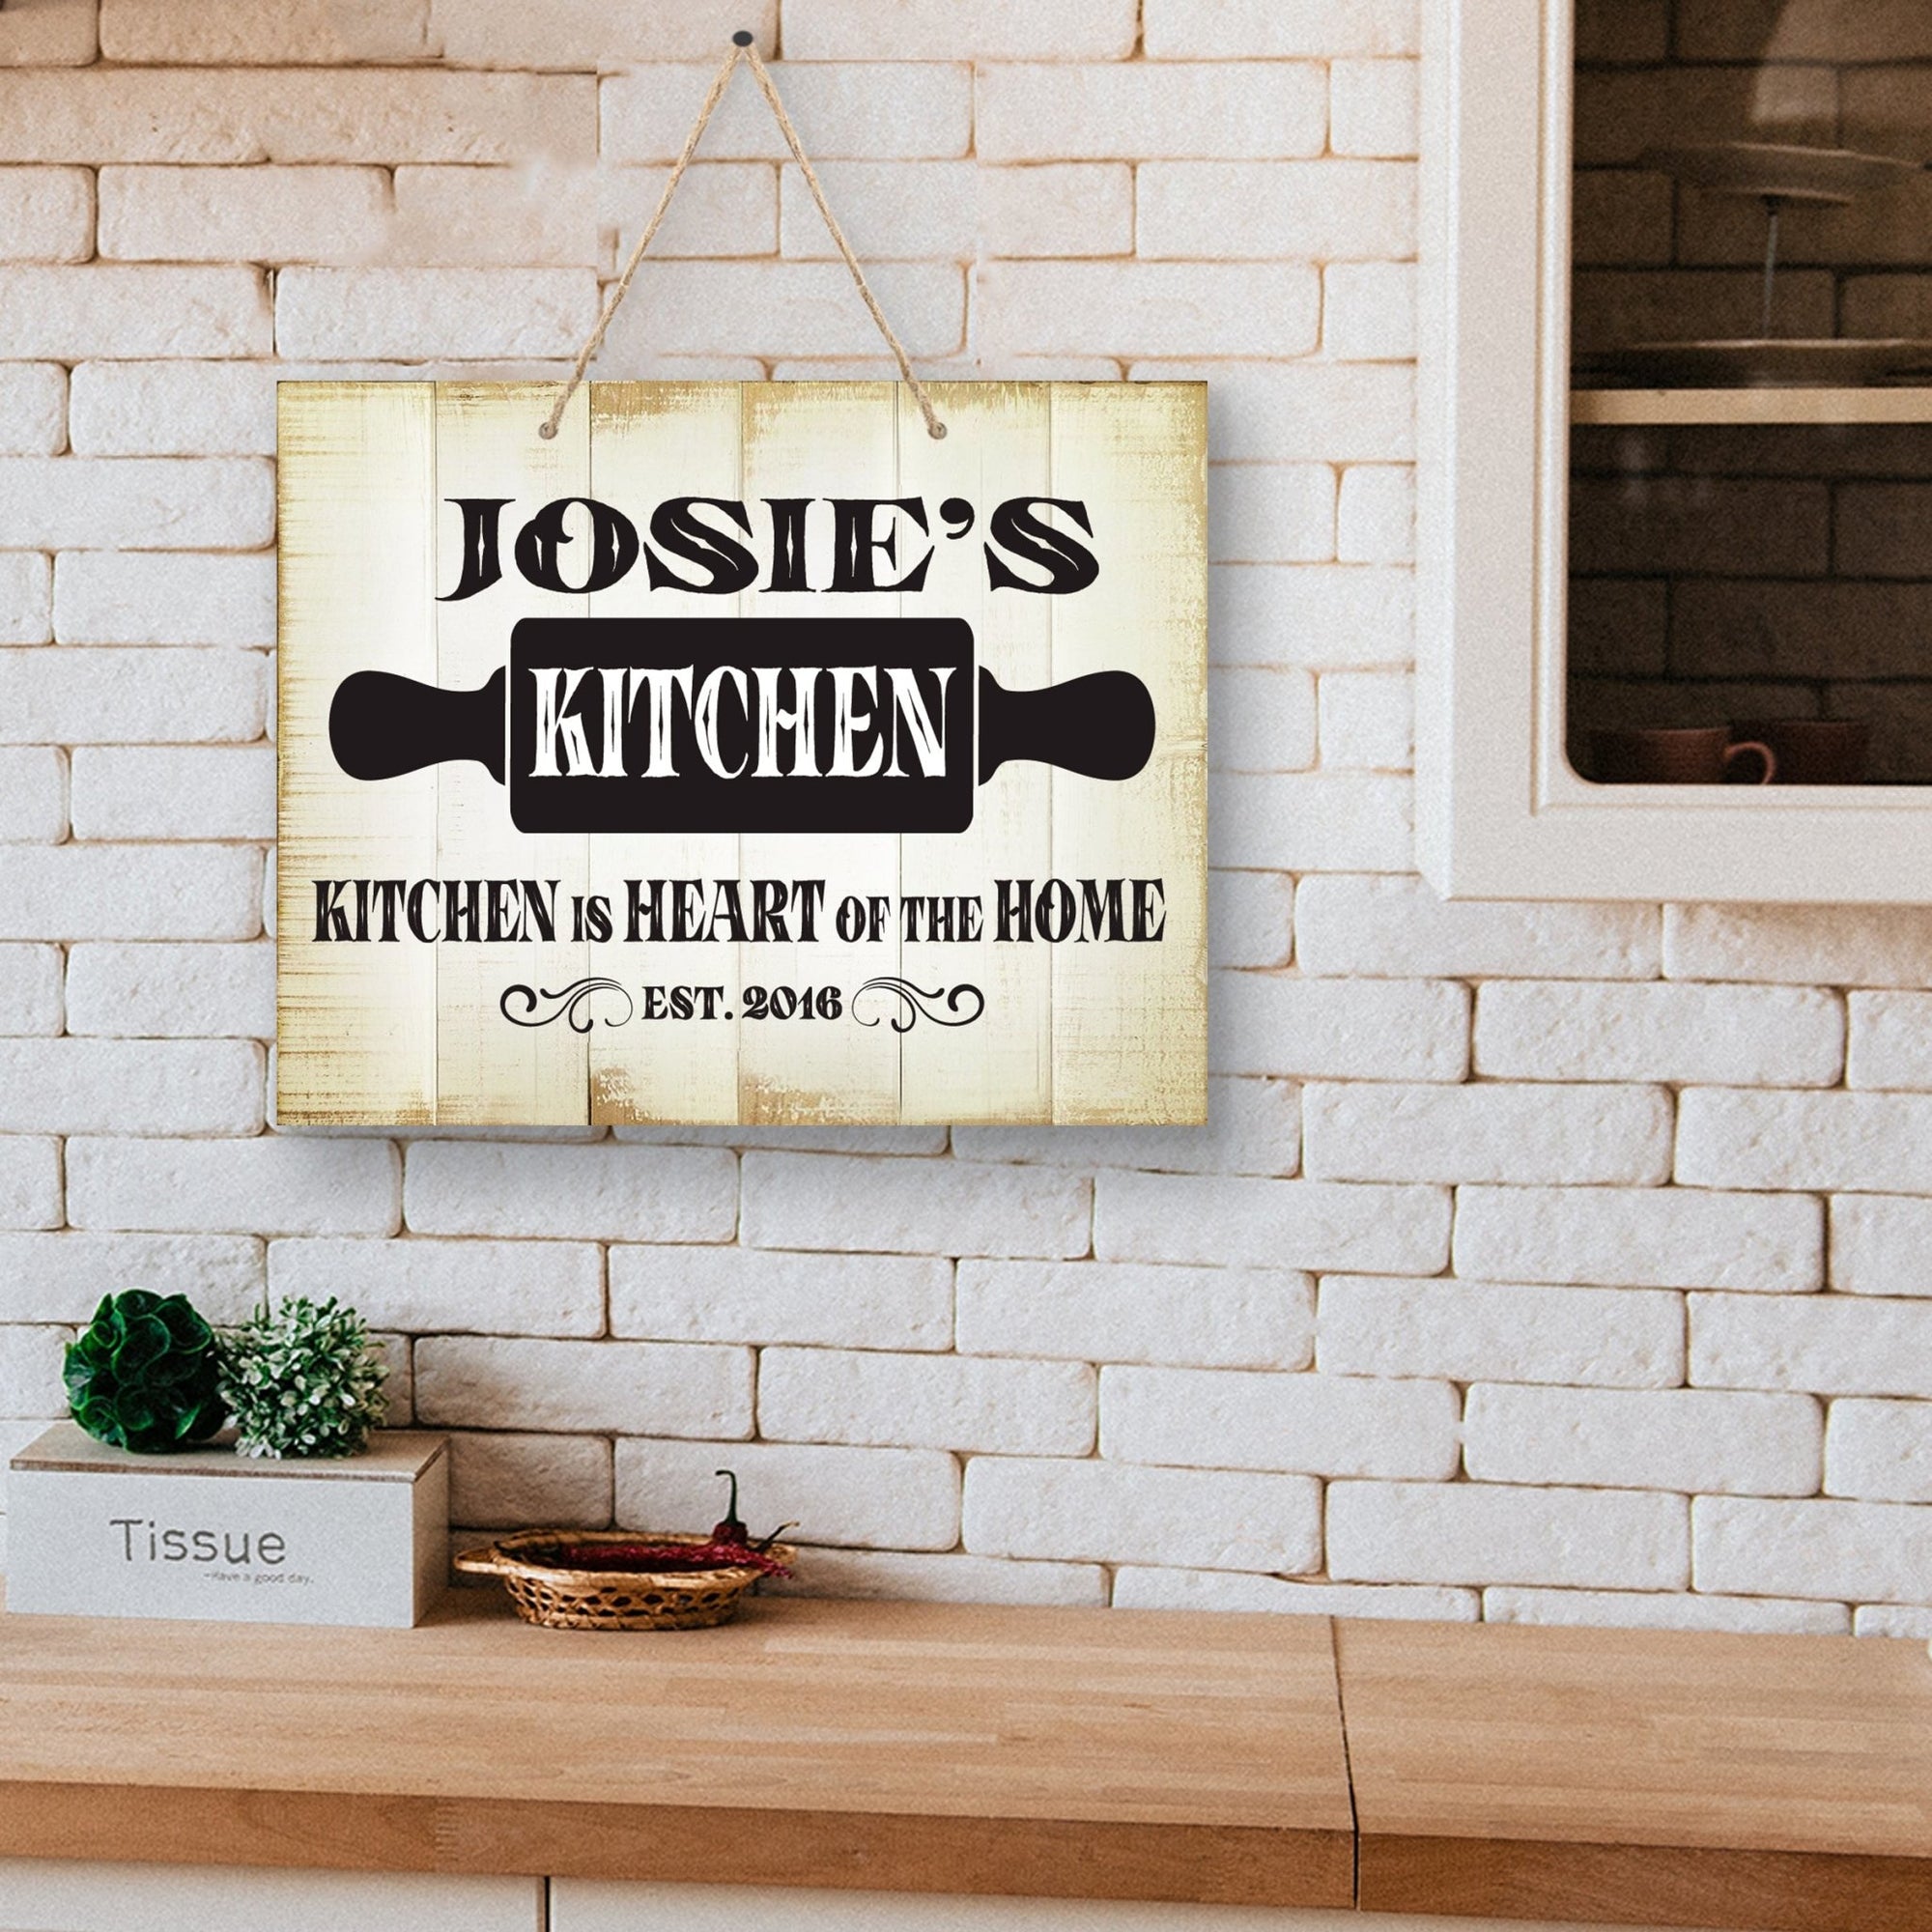 Rustic-Inspired Wooden Wall Hanging Rope Sign For Kitchen & Home Décor - Kitchen Is Heart 2